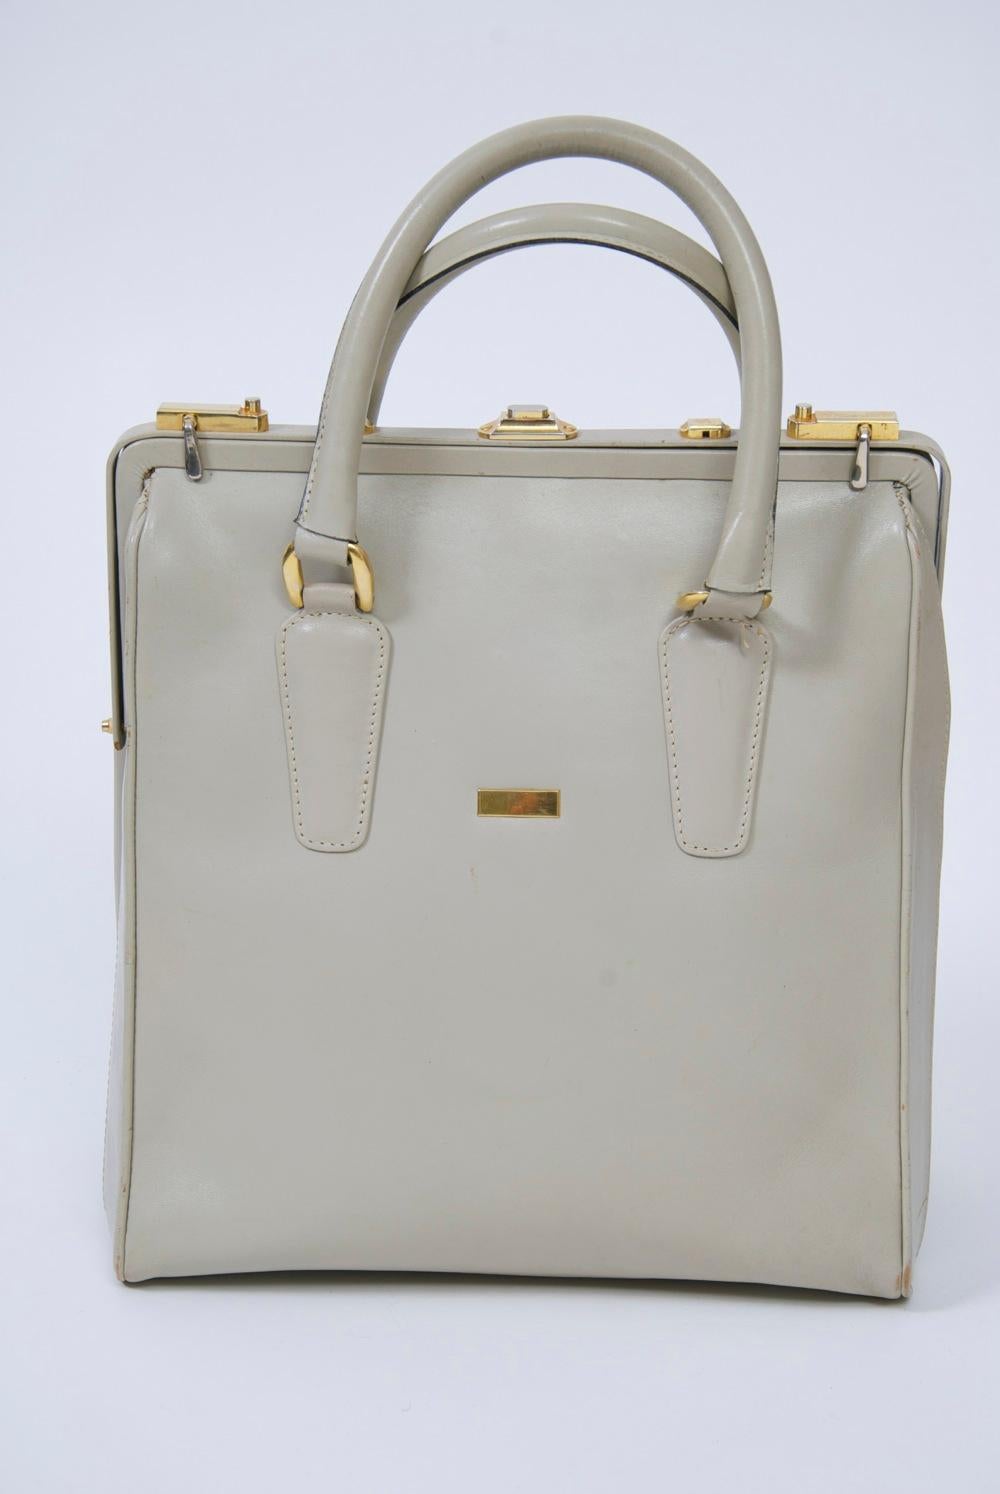 Oversized bone leather handbag by Rosina Ferragamo Schiavone, who was Salvatore's sister and who is primarily known for her striking shoe designs from the 1950s-1980s. This example, retailed by high-end shoe emporium, Joseph's, in Jacksonville, FL,